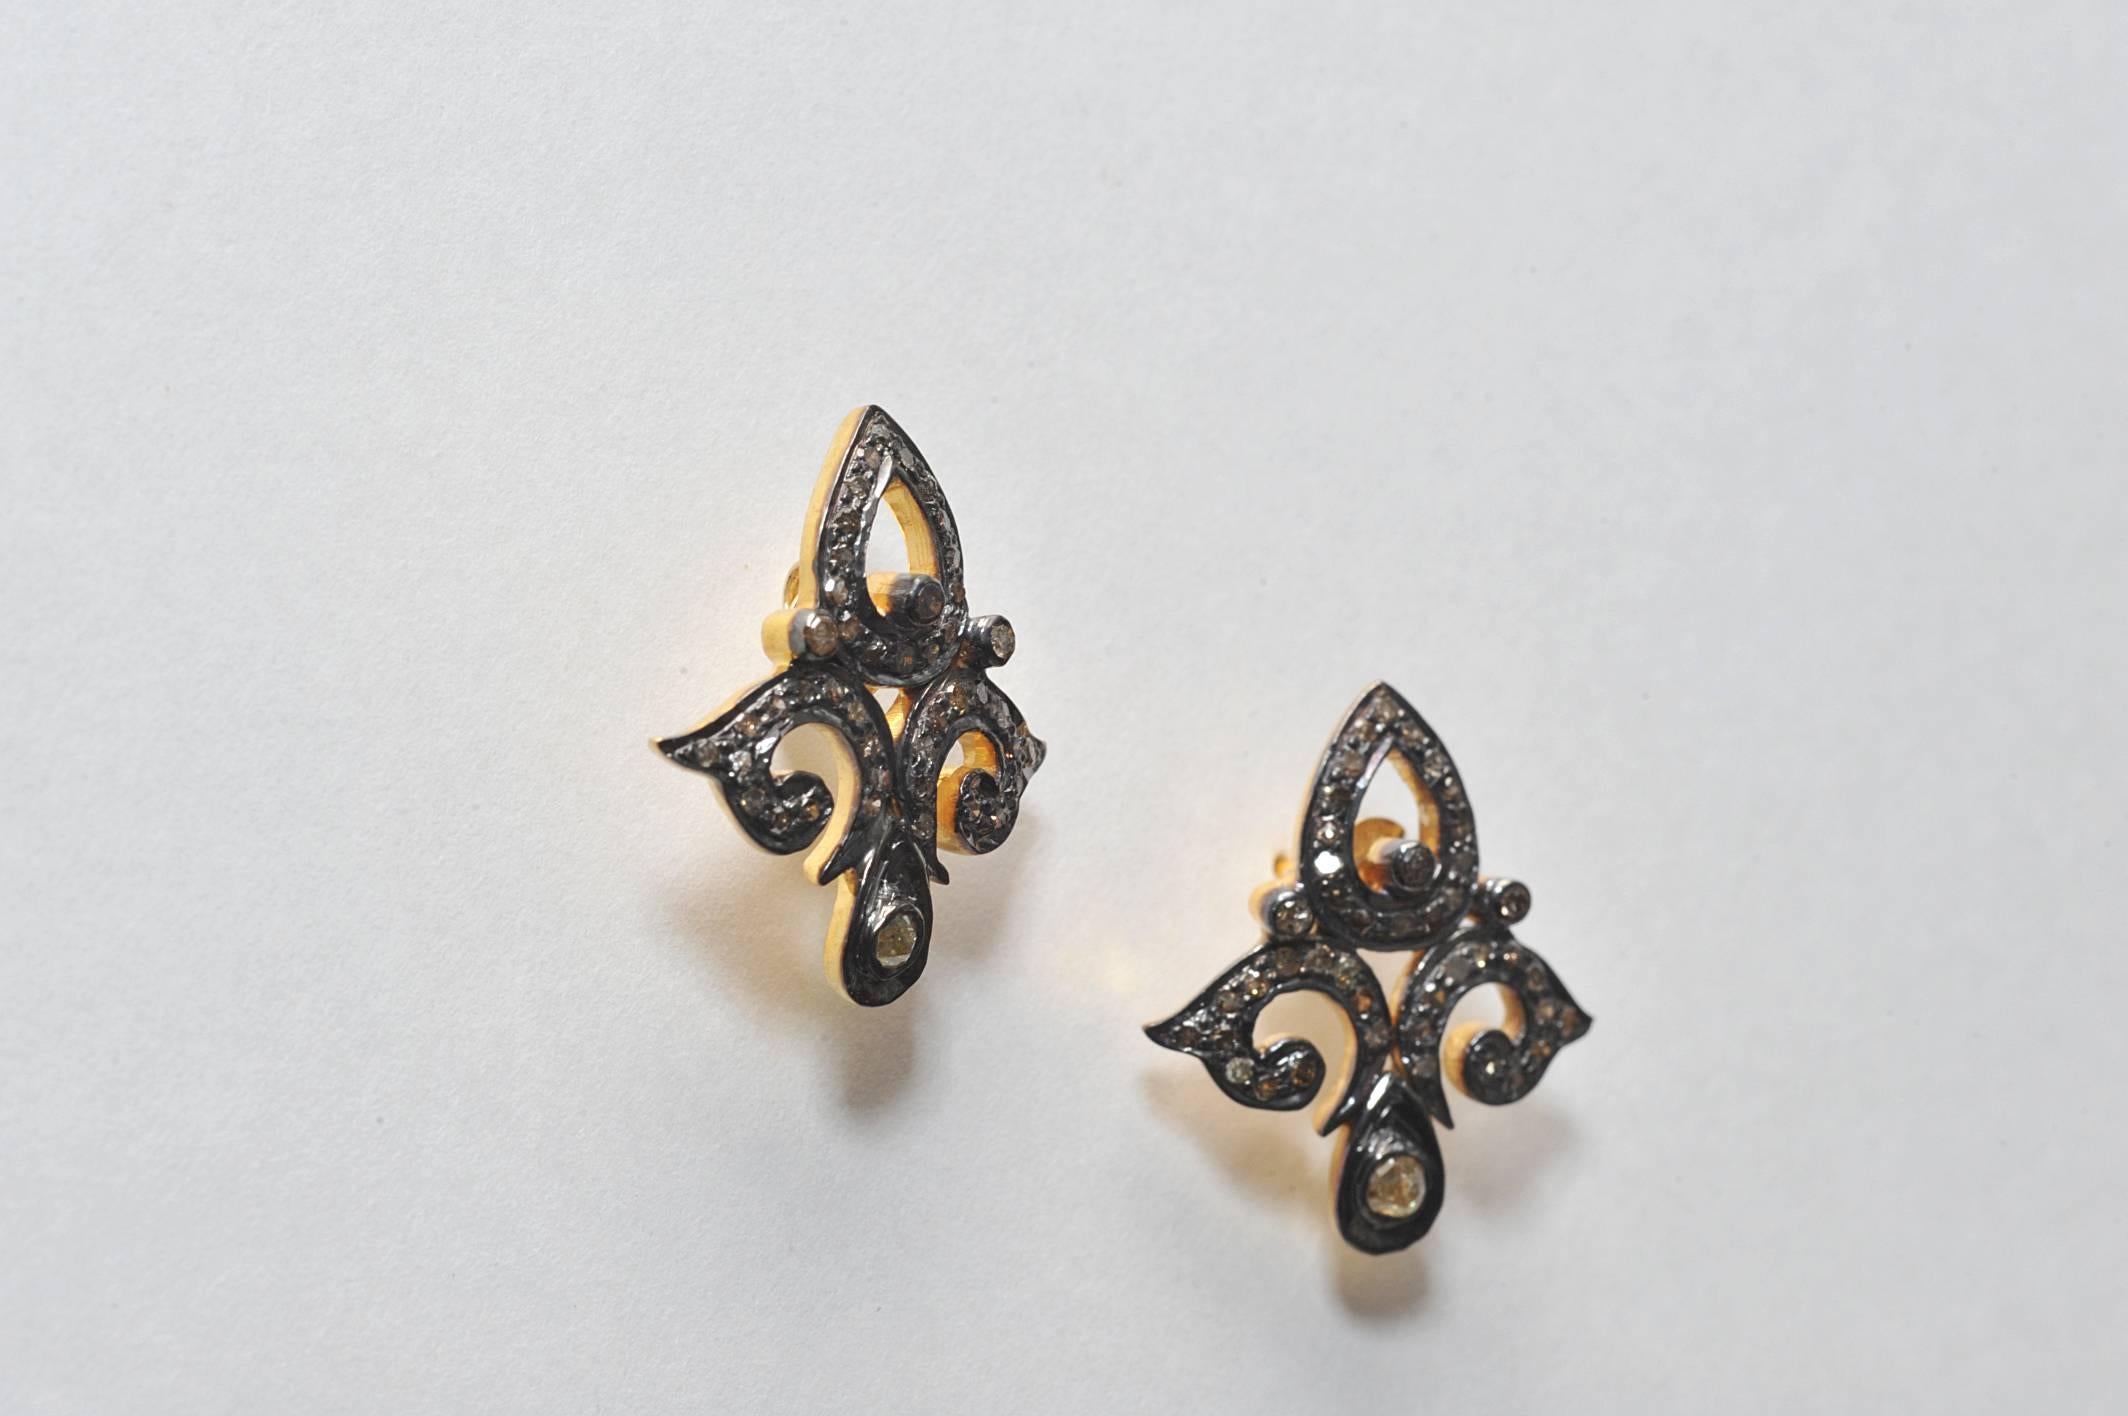 Diamonds set in oxidized sterling in a classic fleur de lis design with 18K gold post for pierced ears.  Carat weight is .87.